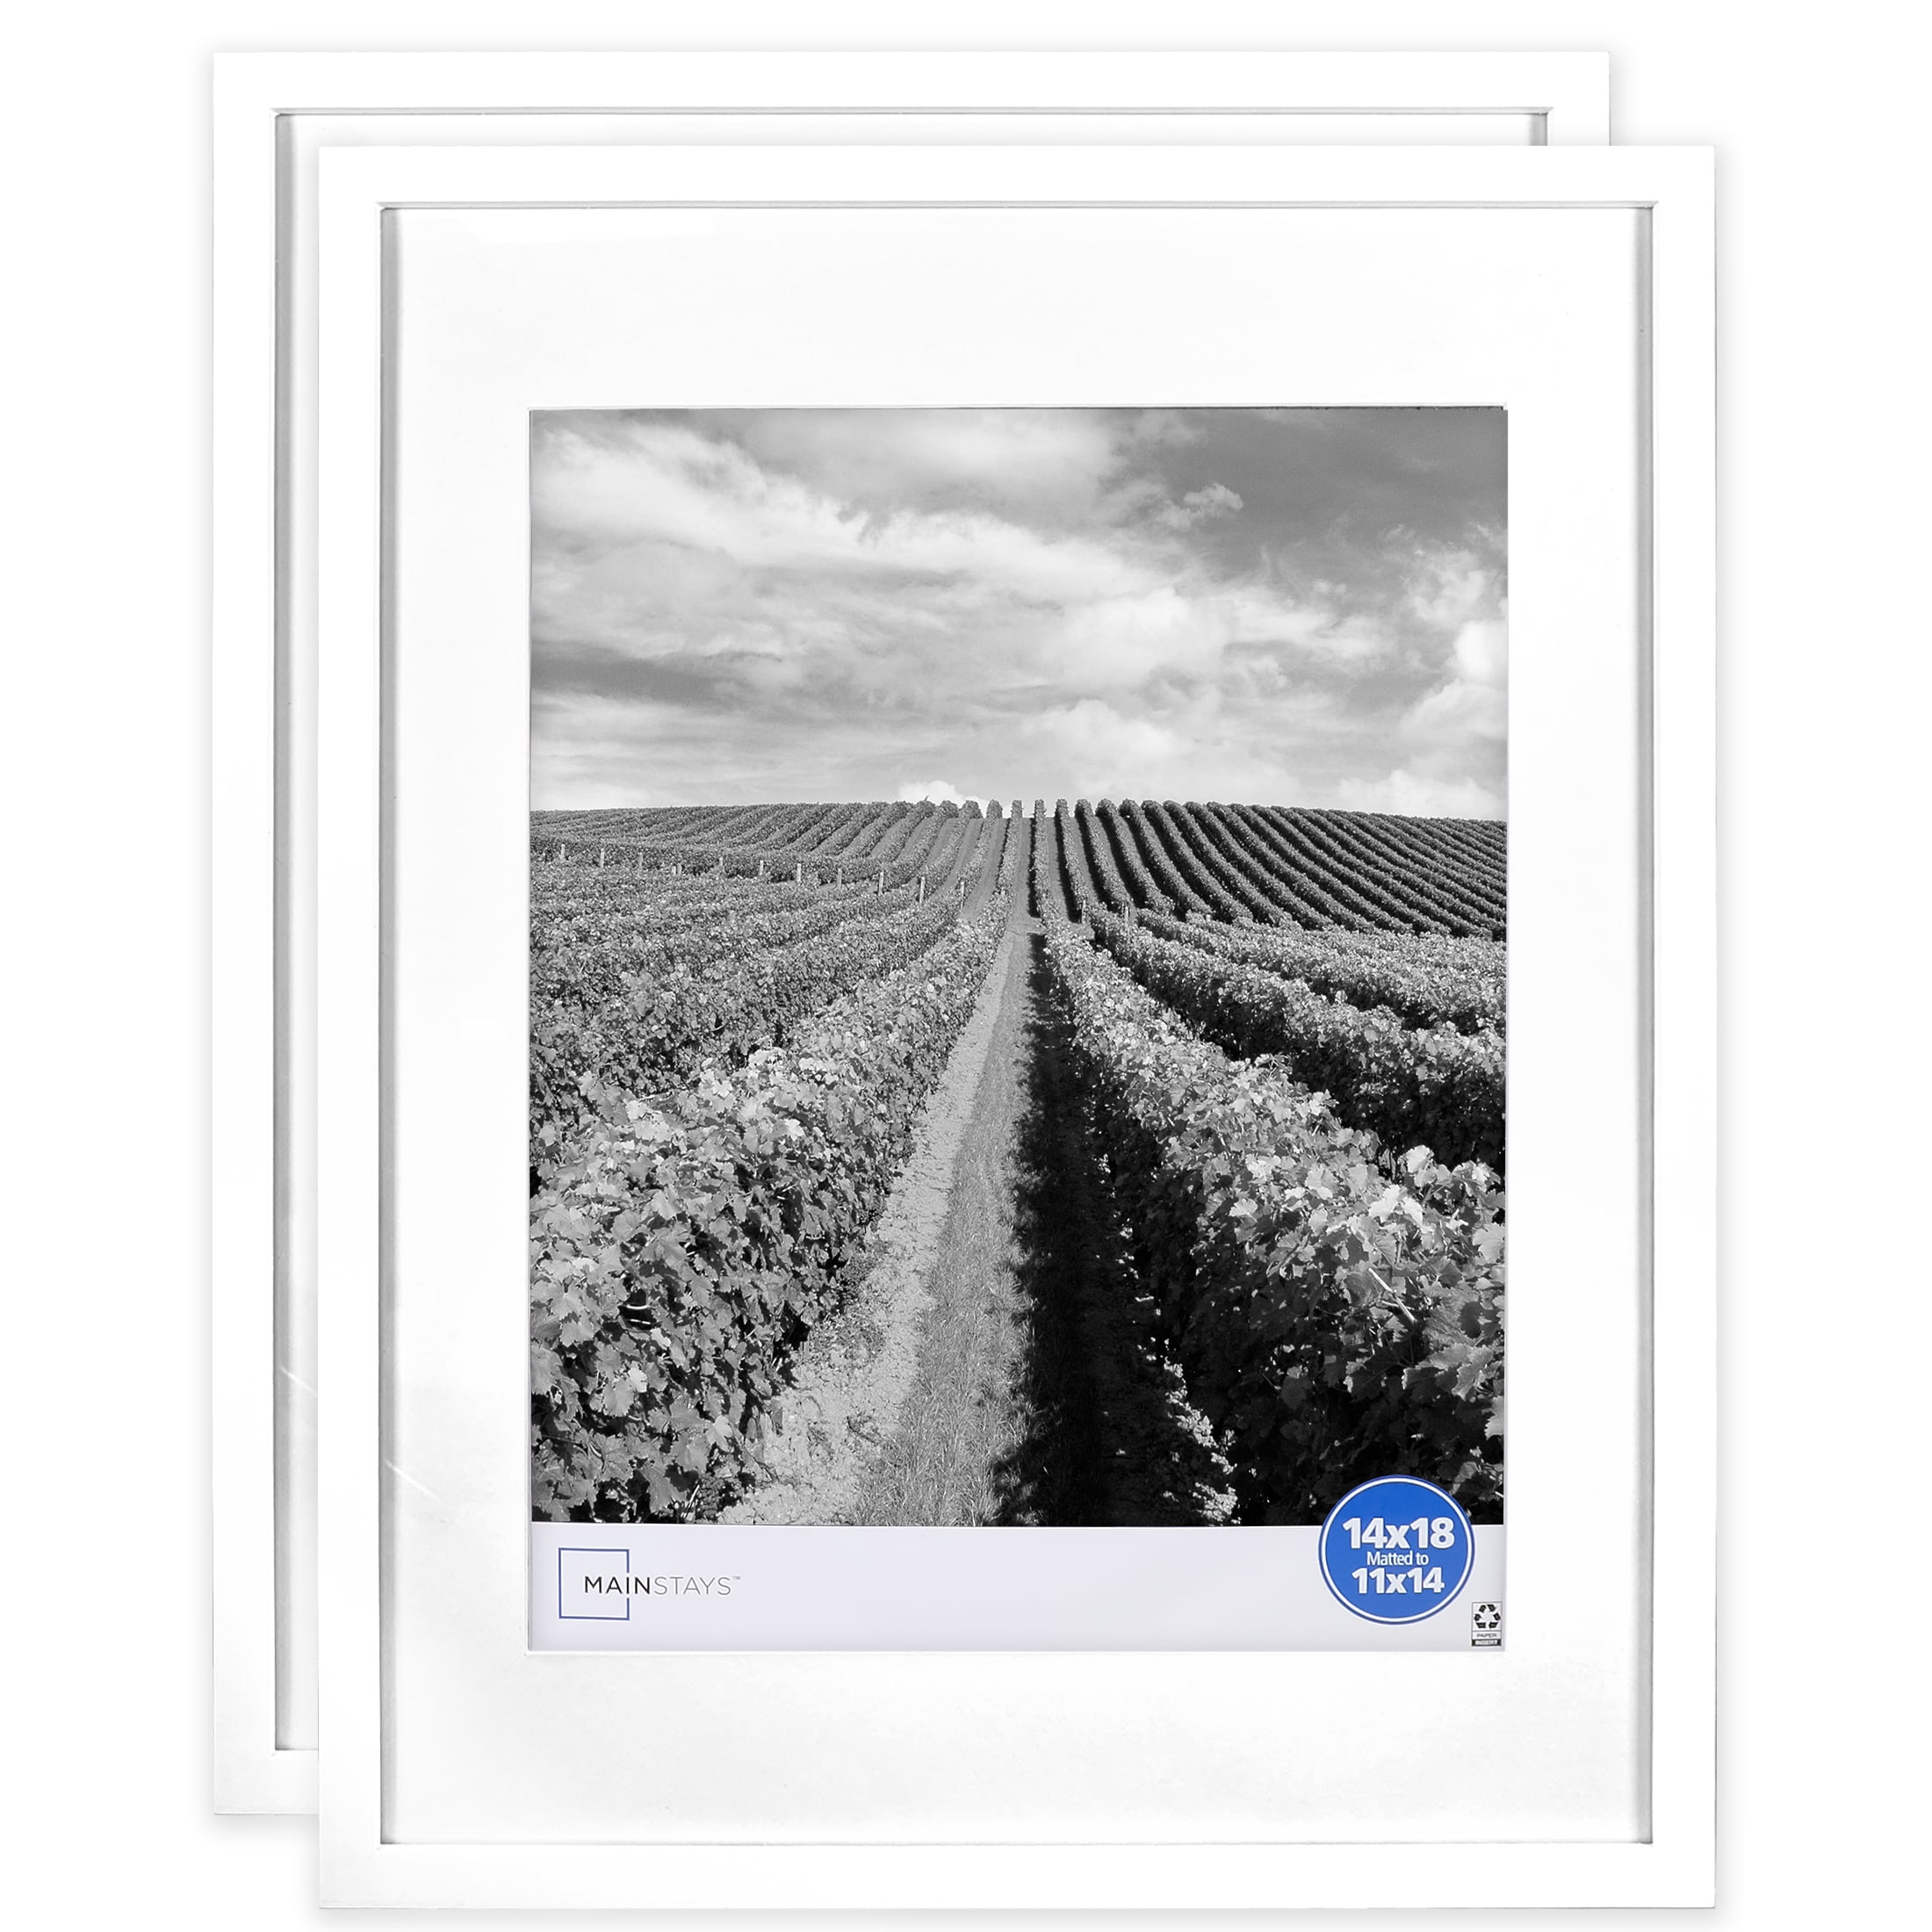 Mainstays Museum 16 x 20 Matted to 11 x 14 Picture Frame, White